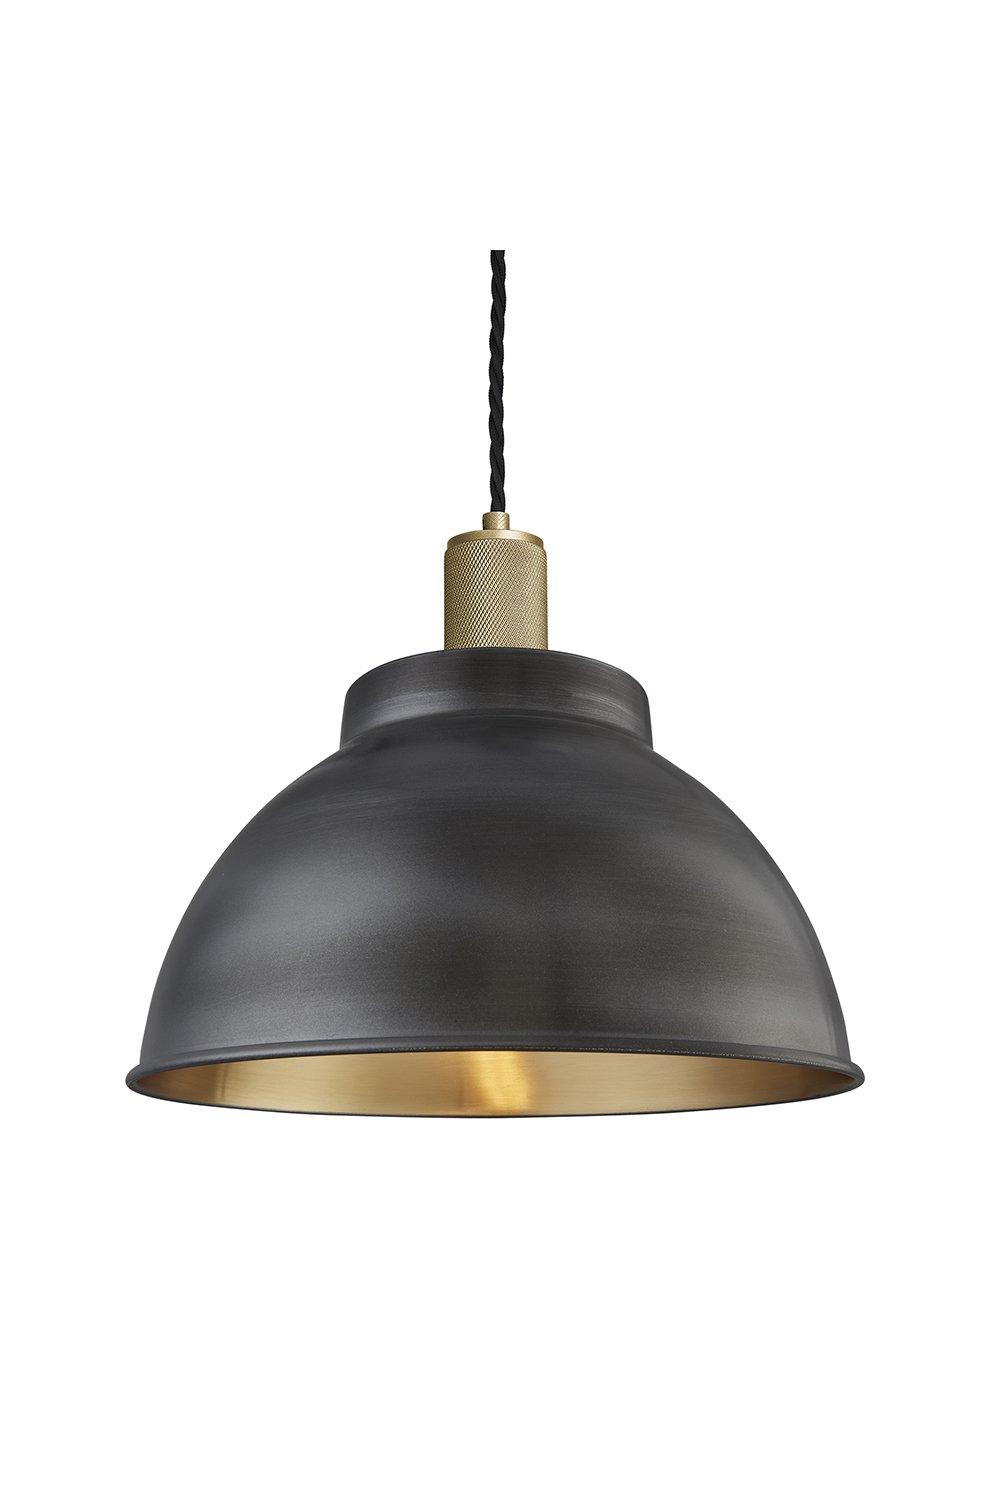 Knurled Dome Pendant, 13 Inch, Pewter & Brass, Brass Holder